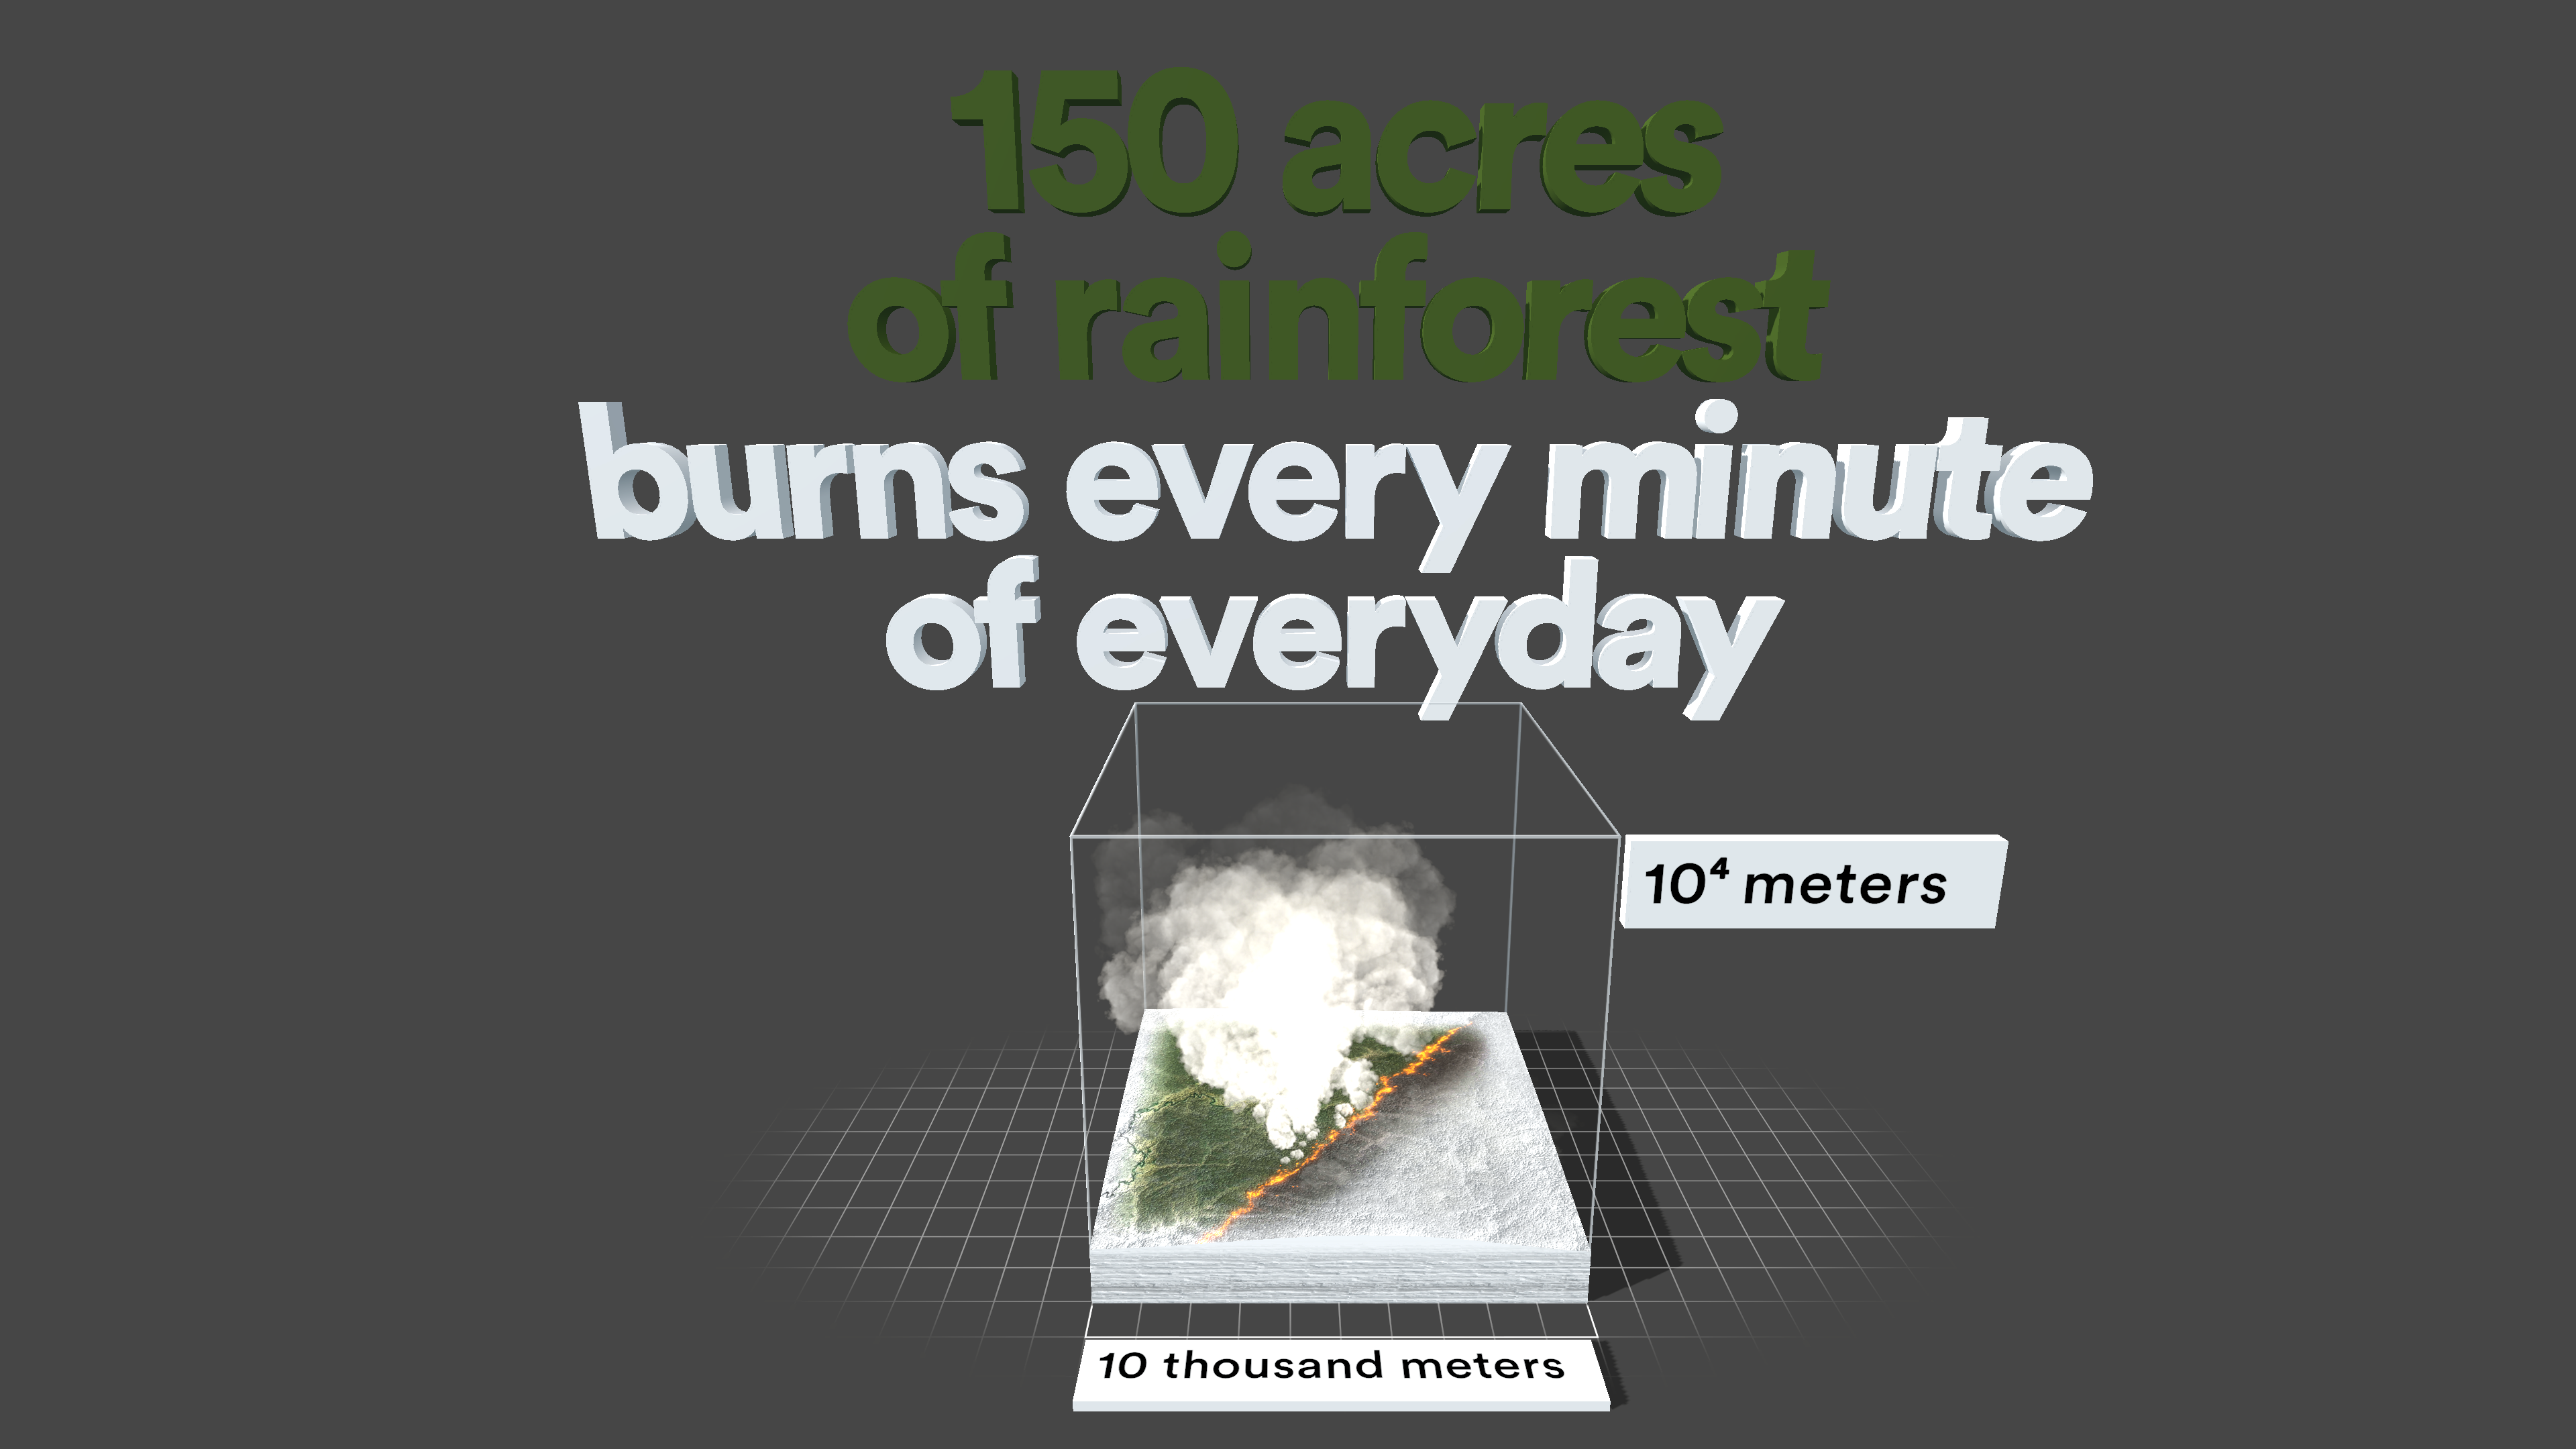 Powers of X, showing the text “150 acres of rainforest burns every minute of everyday”. Created by AnythingEverything.